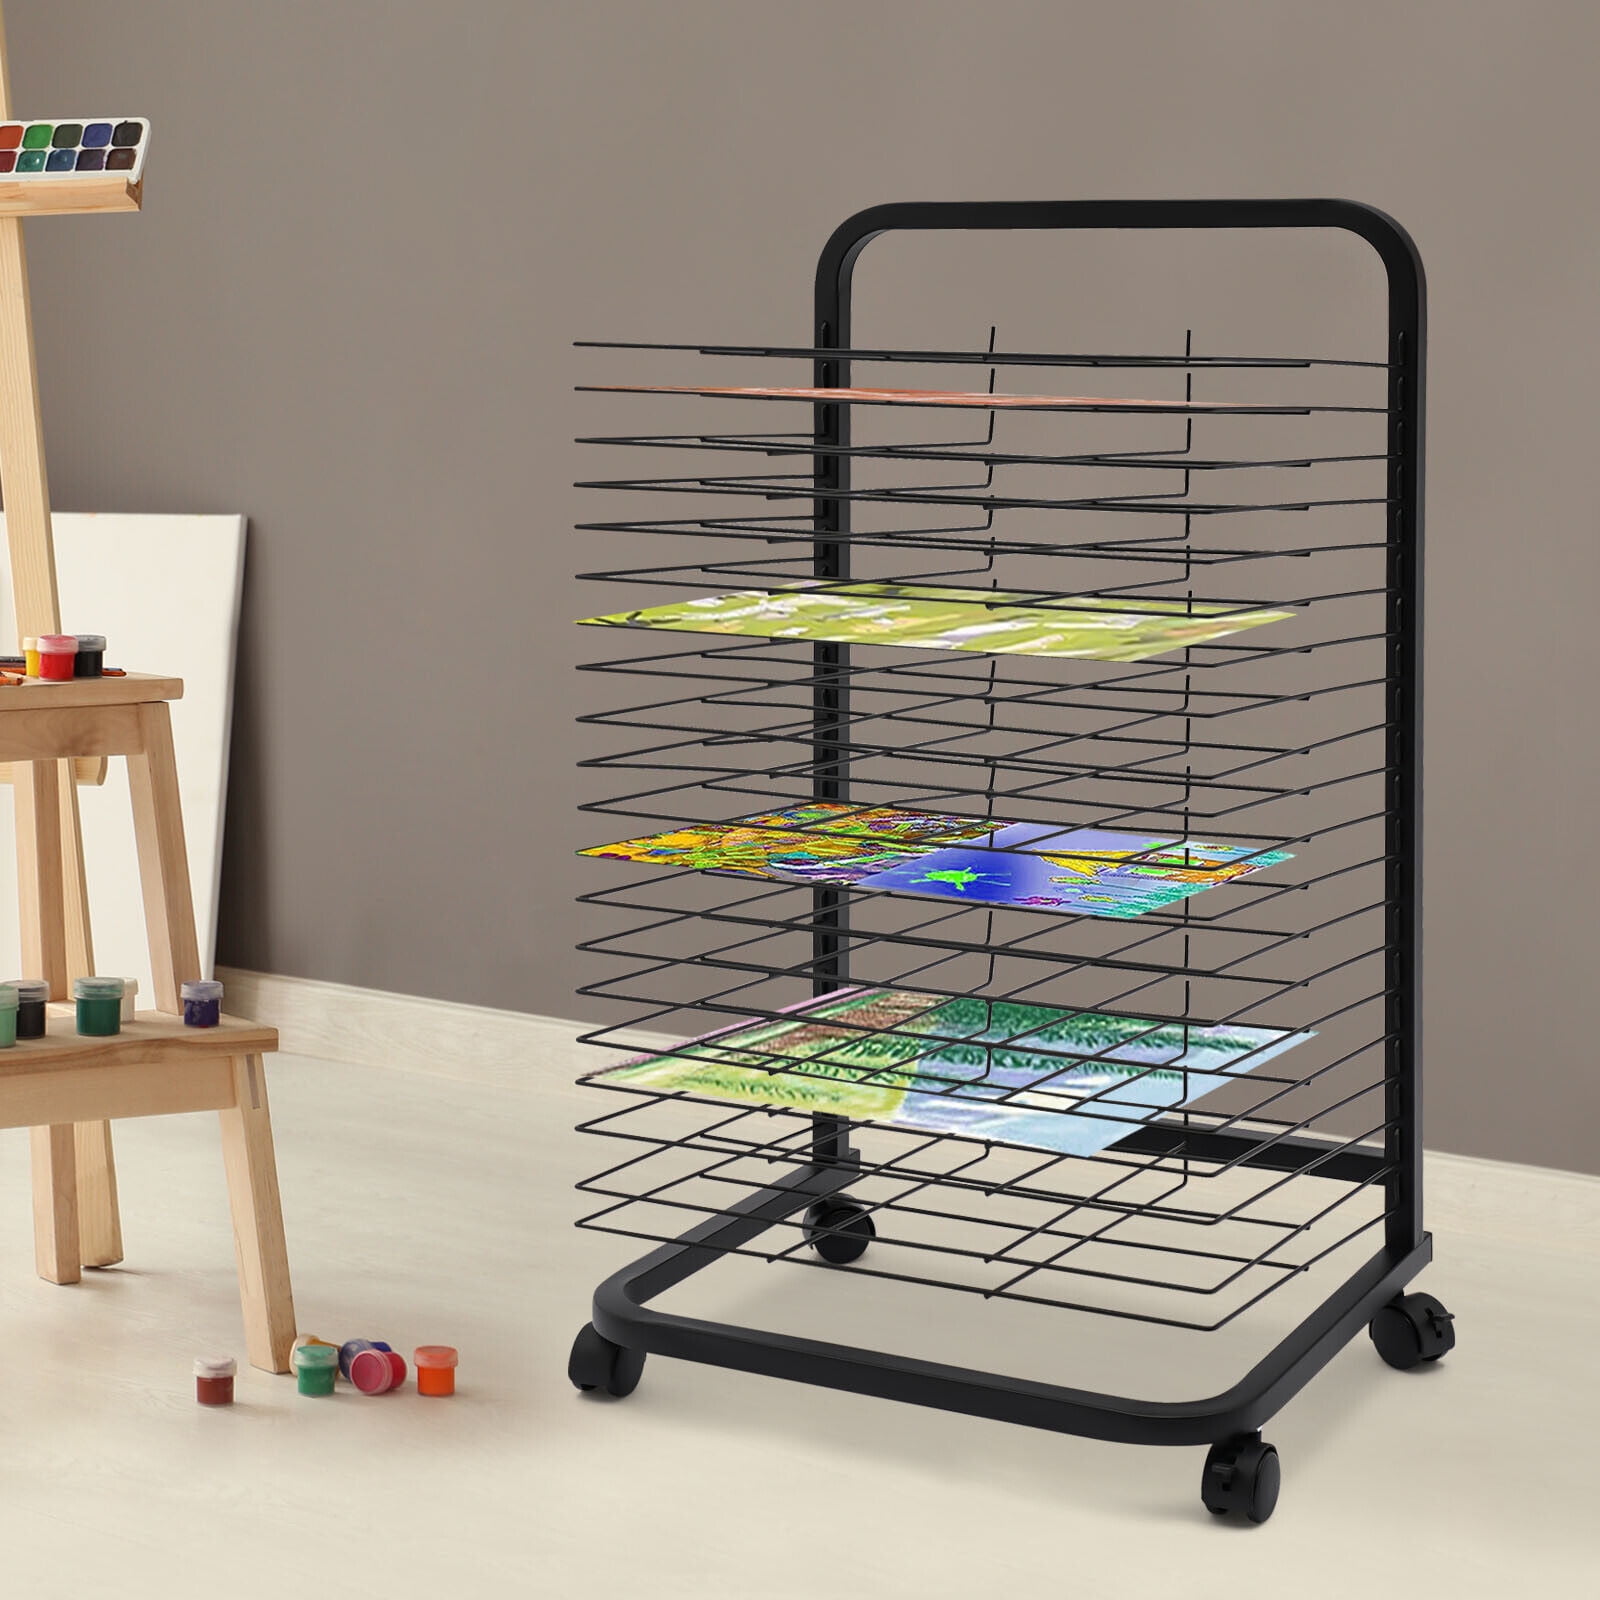  Towallmark Art Drying Rack with 25 Flexible Shelves, Mobile  Paint Drying Rack with Four Wheels, Ideal for Schools and Art Studios,  Height 41.5 inches, Shelves 12 by 17 inches,Black : Home & Kitchen